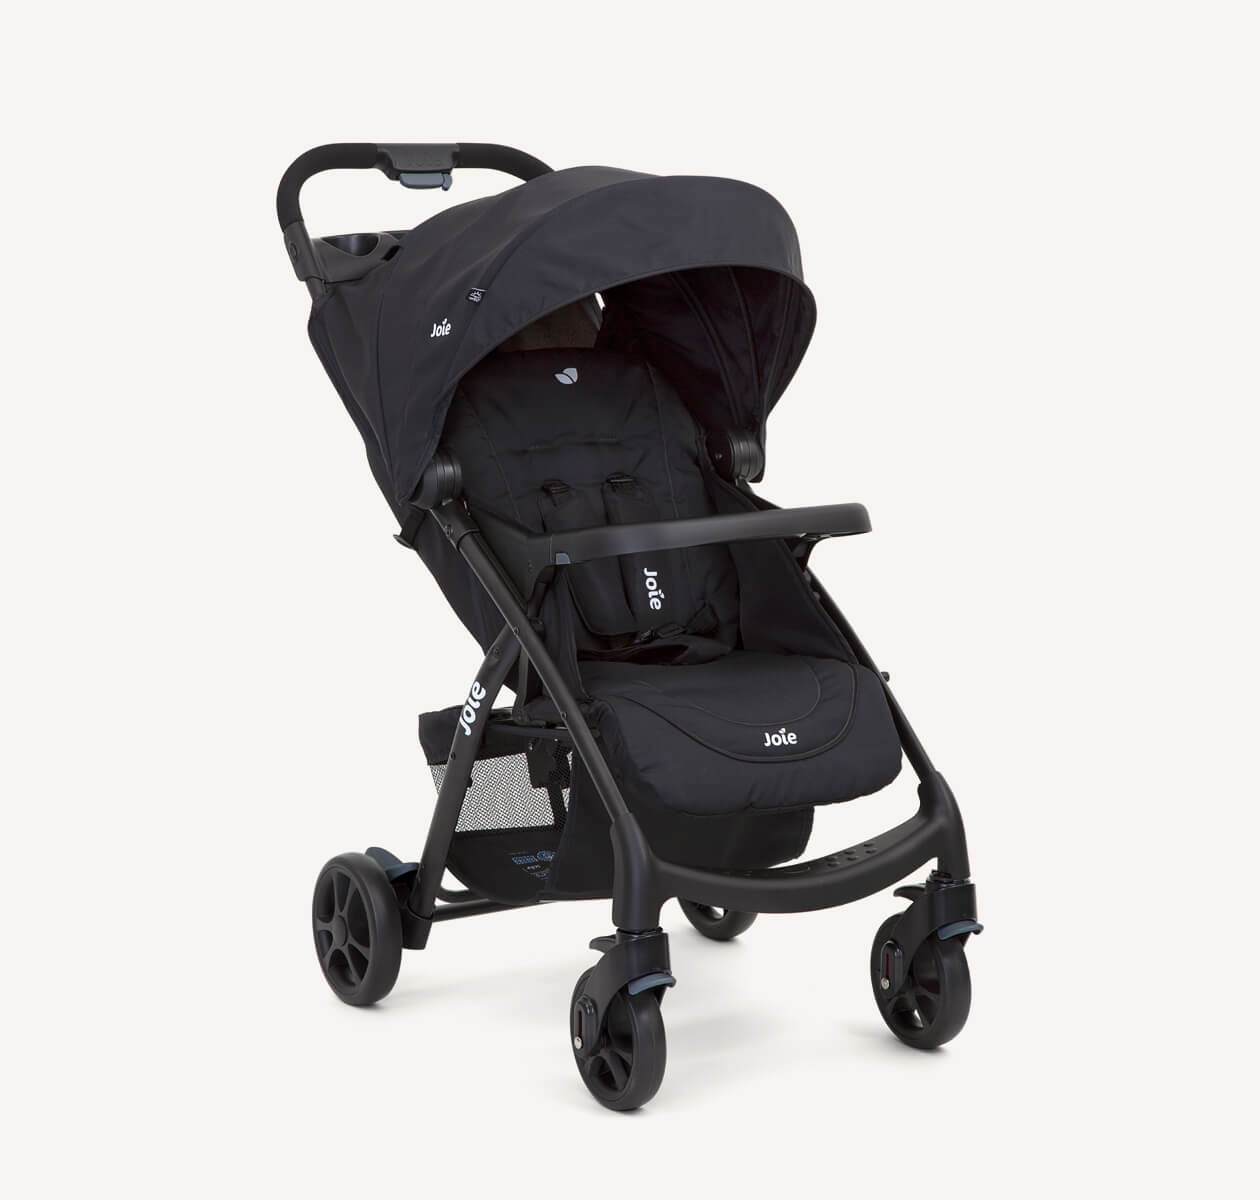  Joie black muze lx stroller positioned at a right angle.